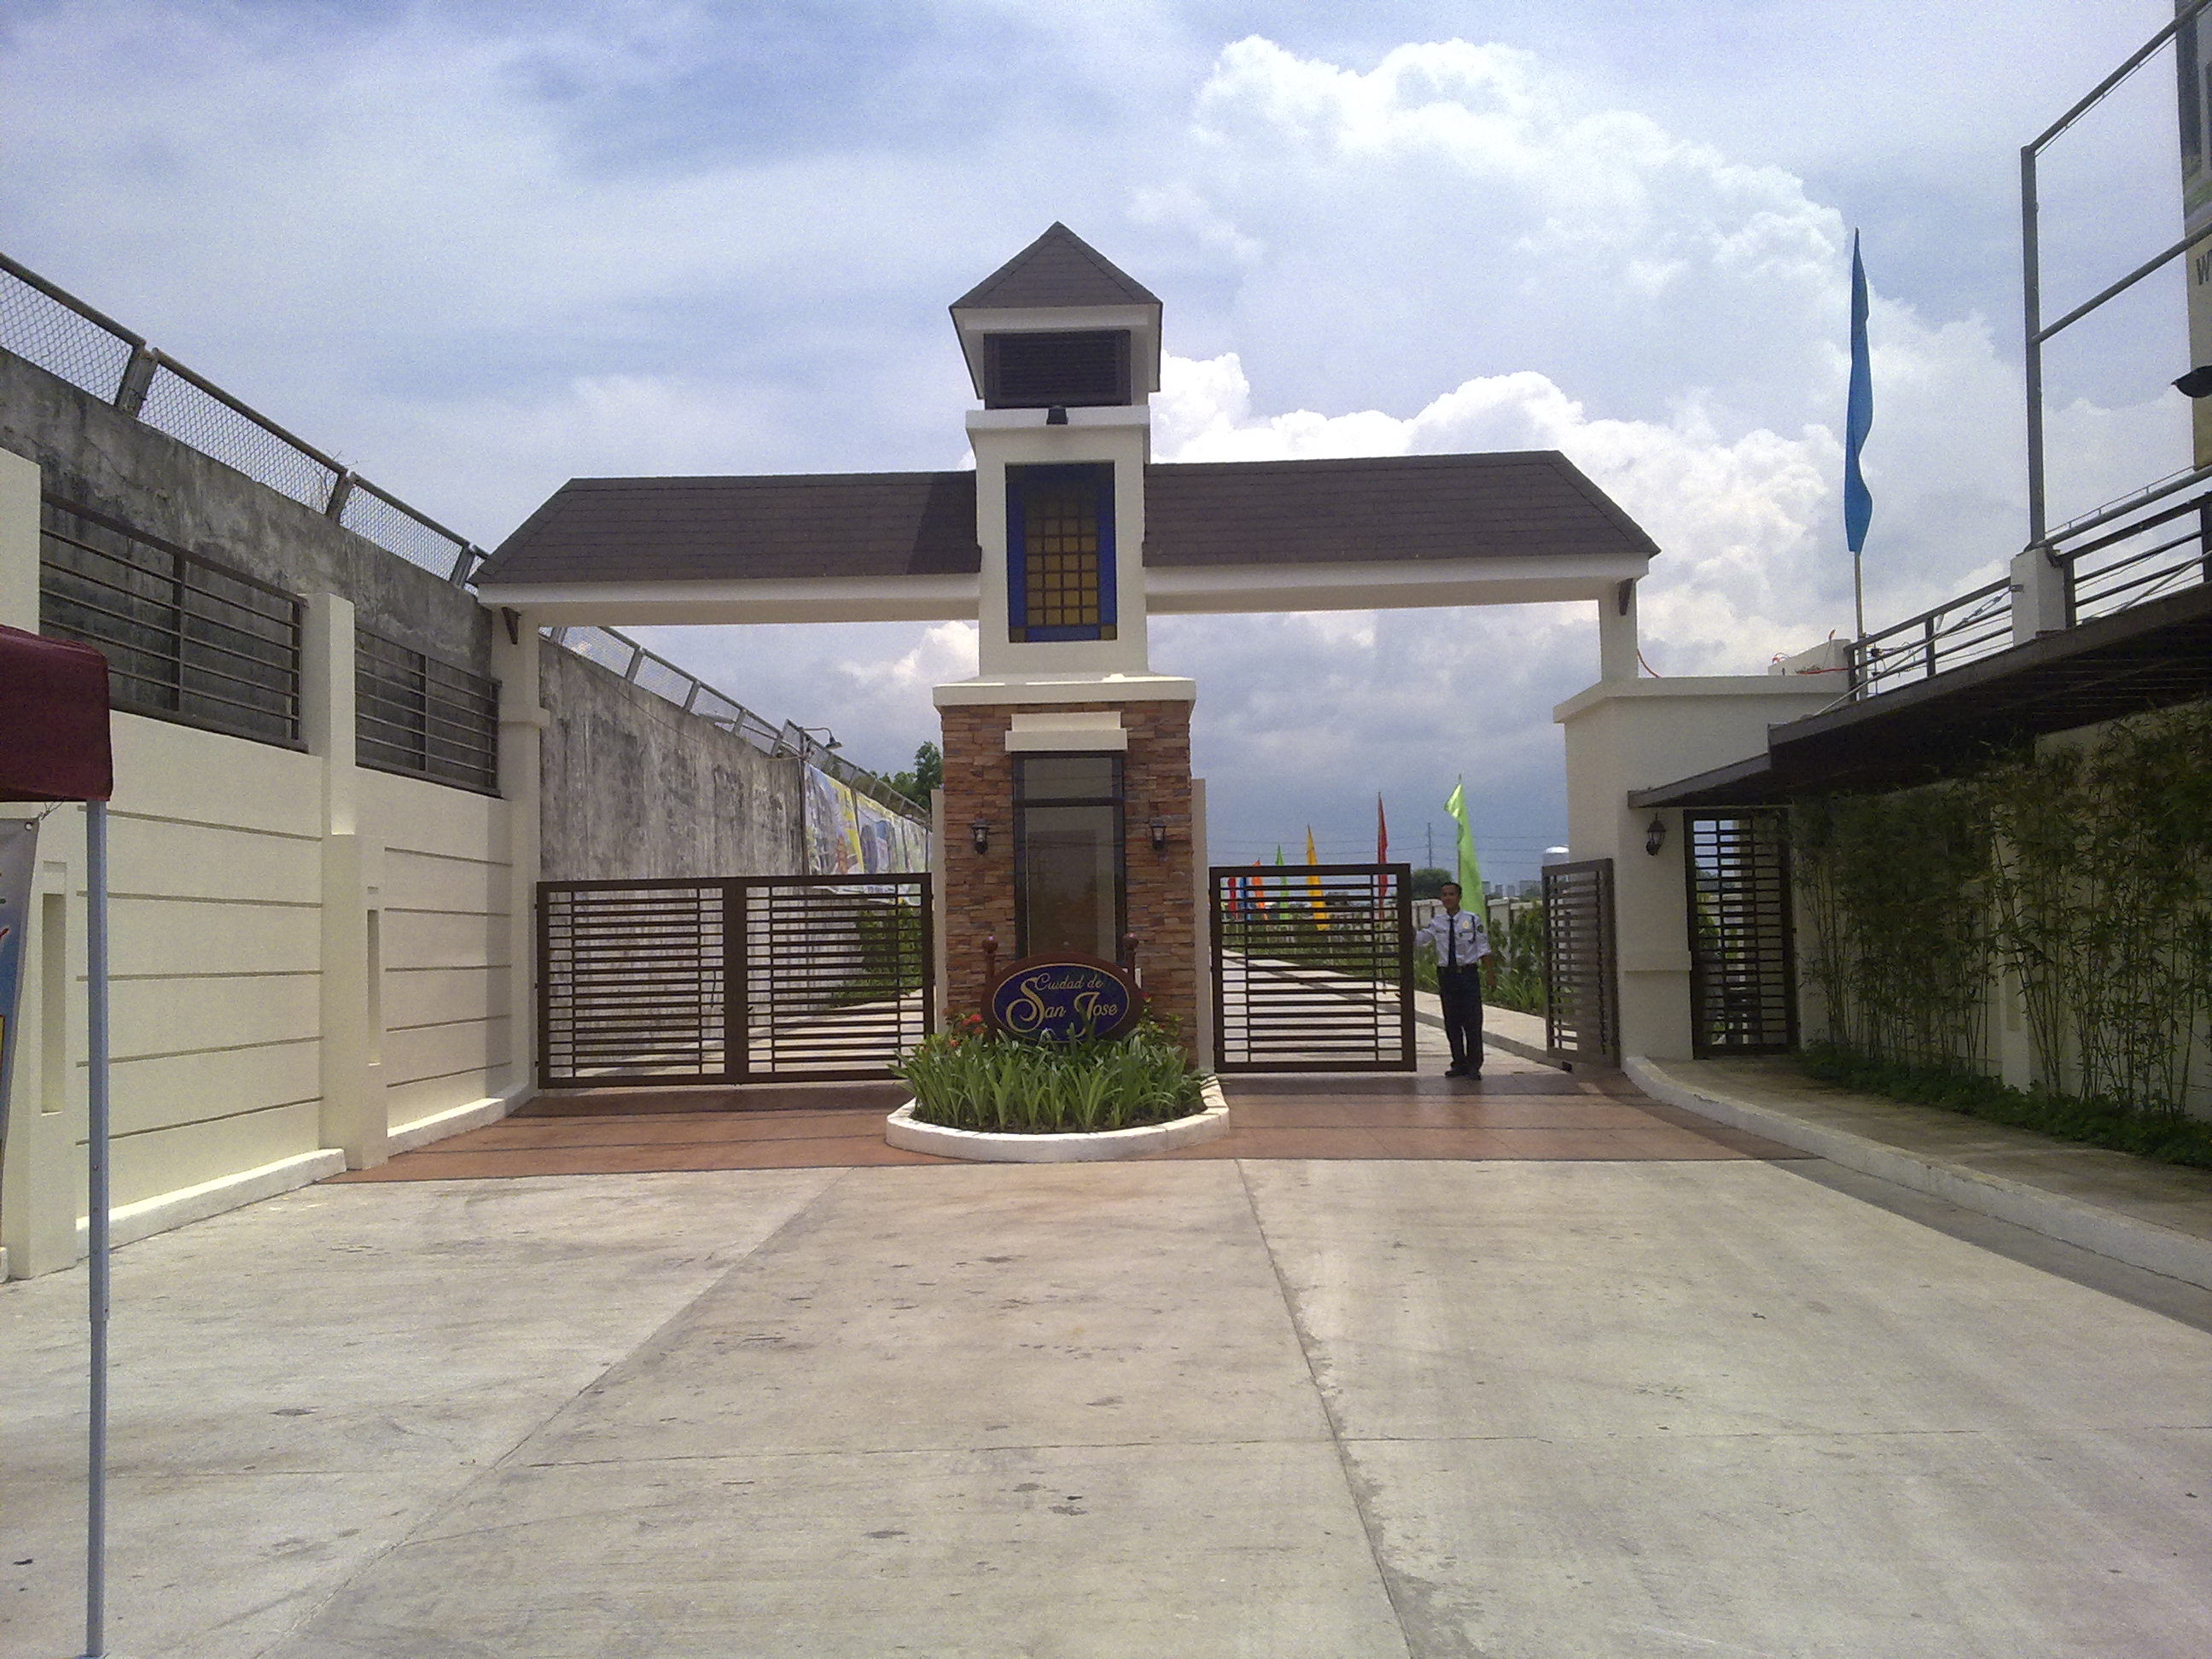 Entrance gate with guard house